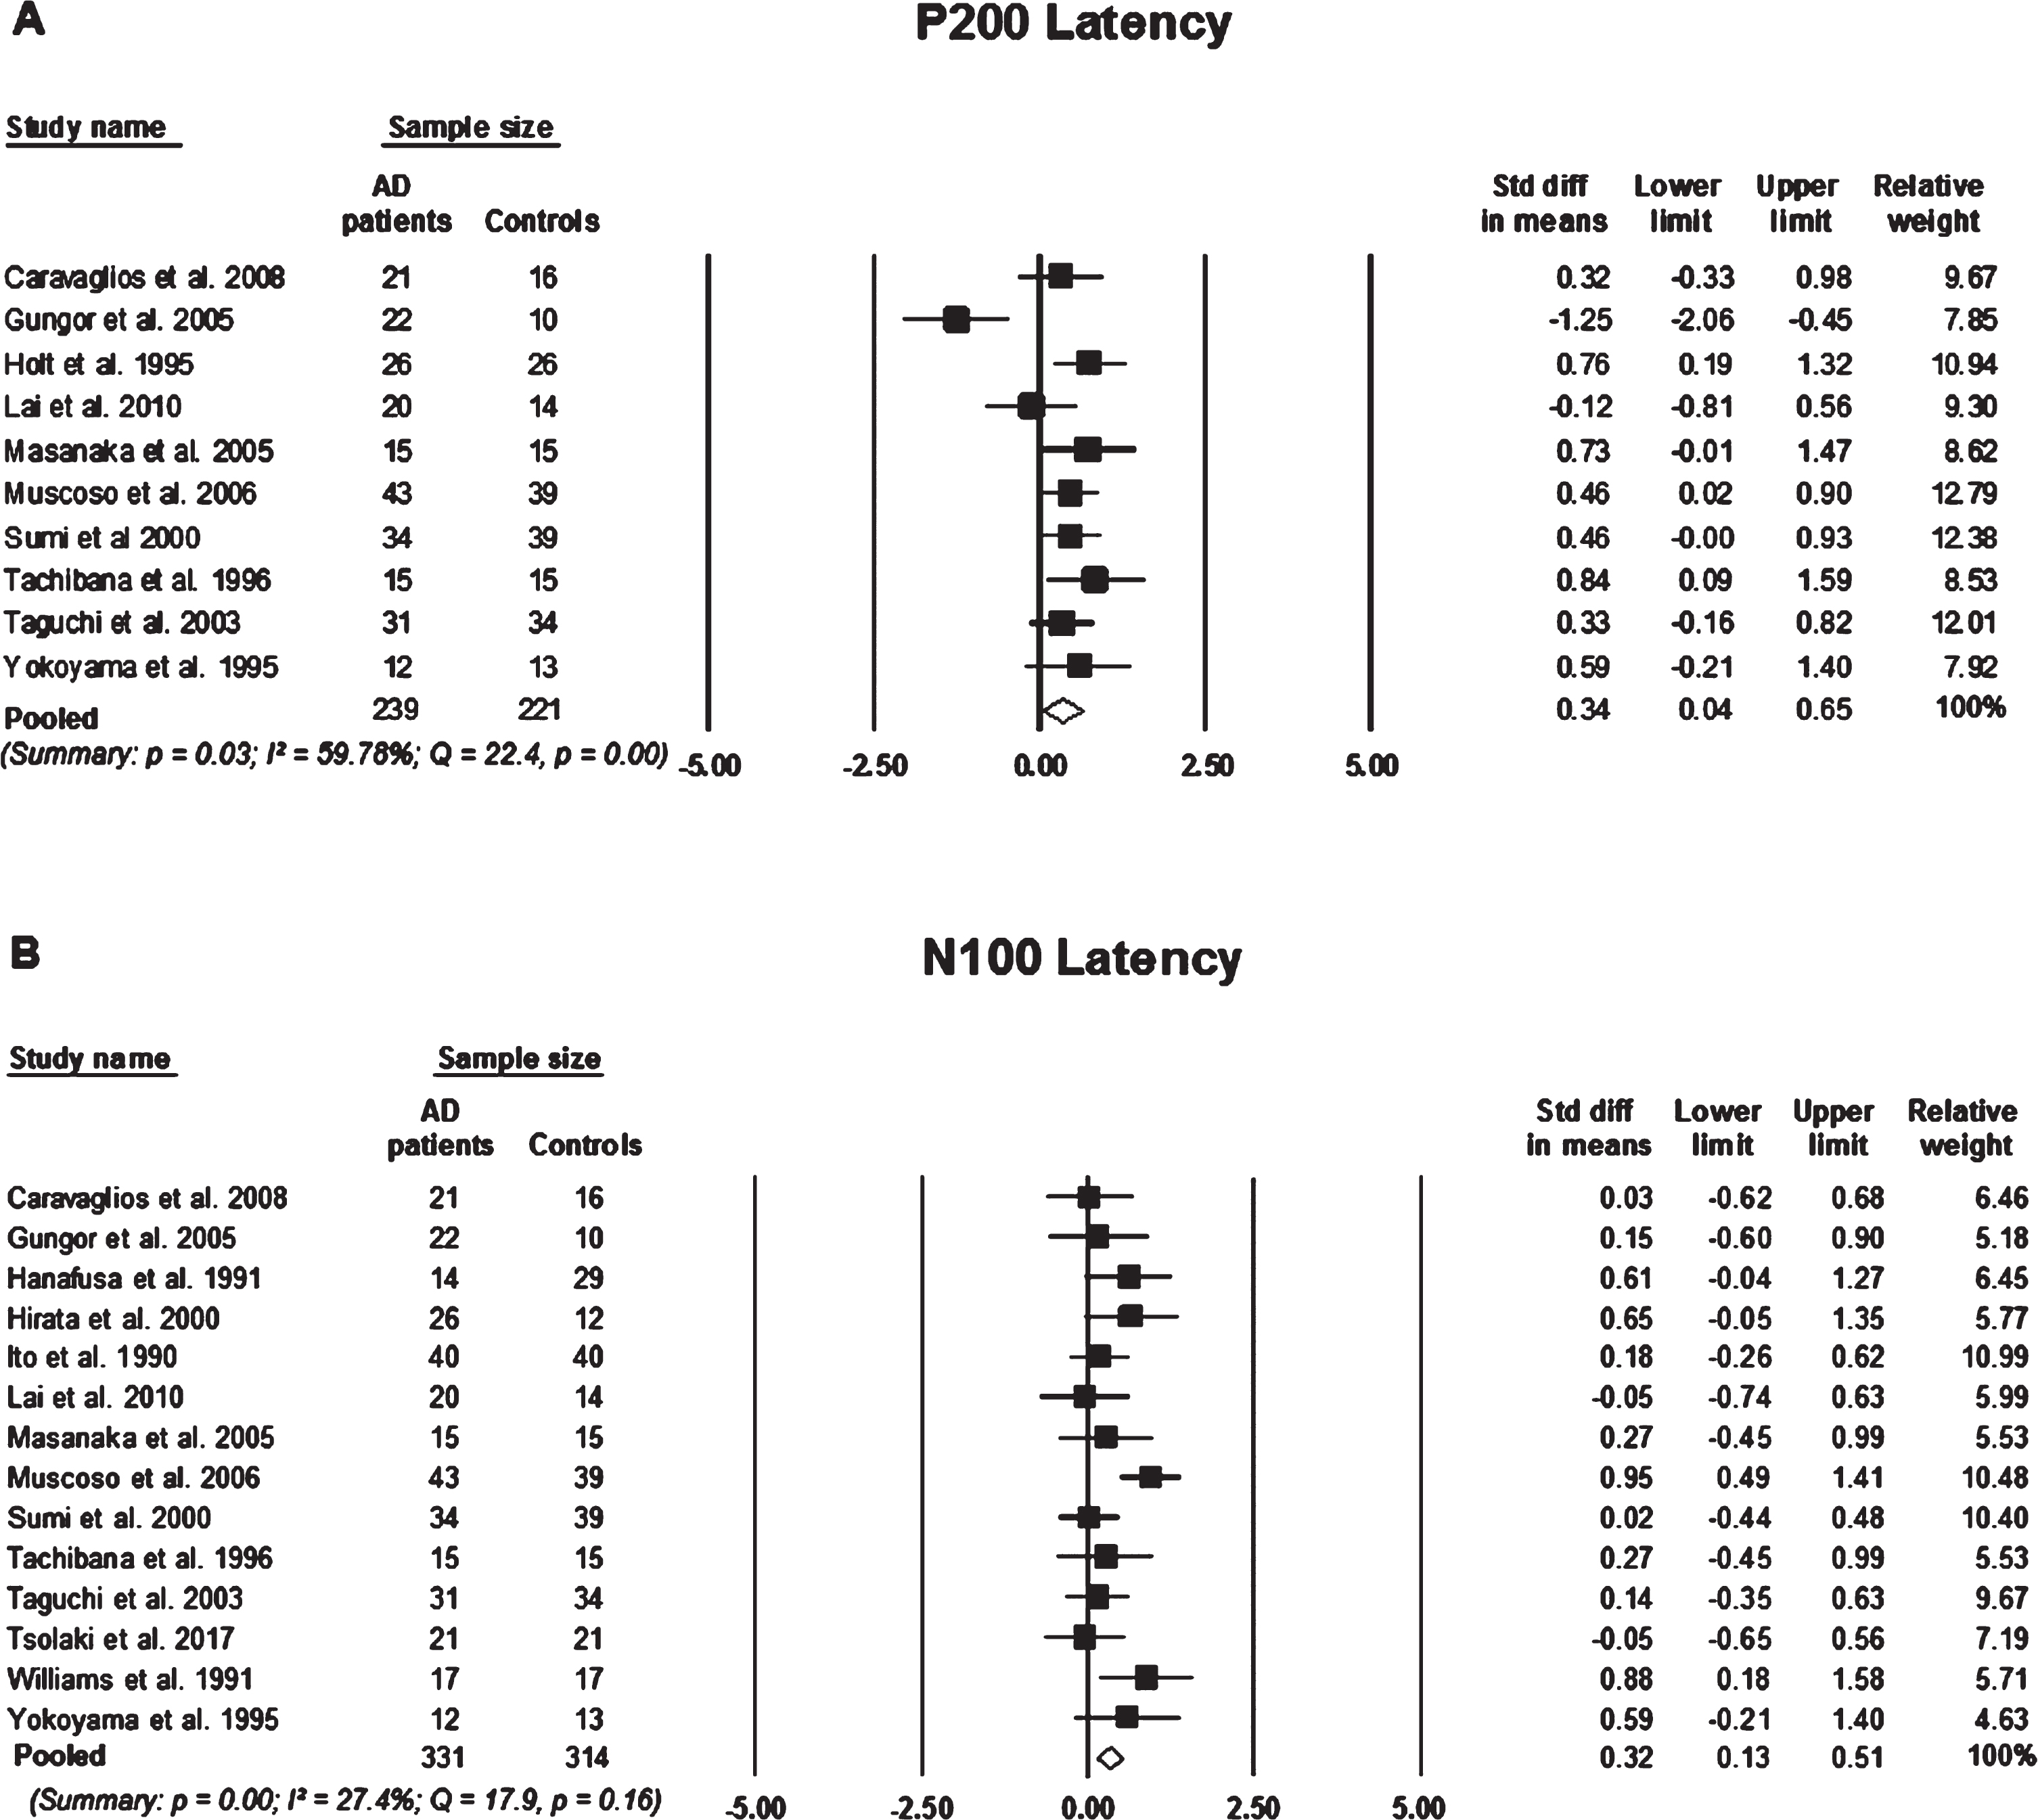 Standard mean difference and pooled estimated of each study included in the meta-analyses of P200 and N100 elicited using an active two-tone oddball paradigm. A) Comparing P200 latency between participants with Alzheimer’s disease (AD) and controls, B) comparing N100 latency between participants with AD and controls. Summary includes: p = significance level; I2 = percentage of heterogeneity; Q = Cochrane’s Q. The horizontal lines represent the 95%confidence interval for each computed standard mean difference. Note: weights are from random effects analysis.